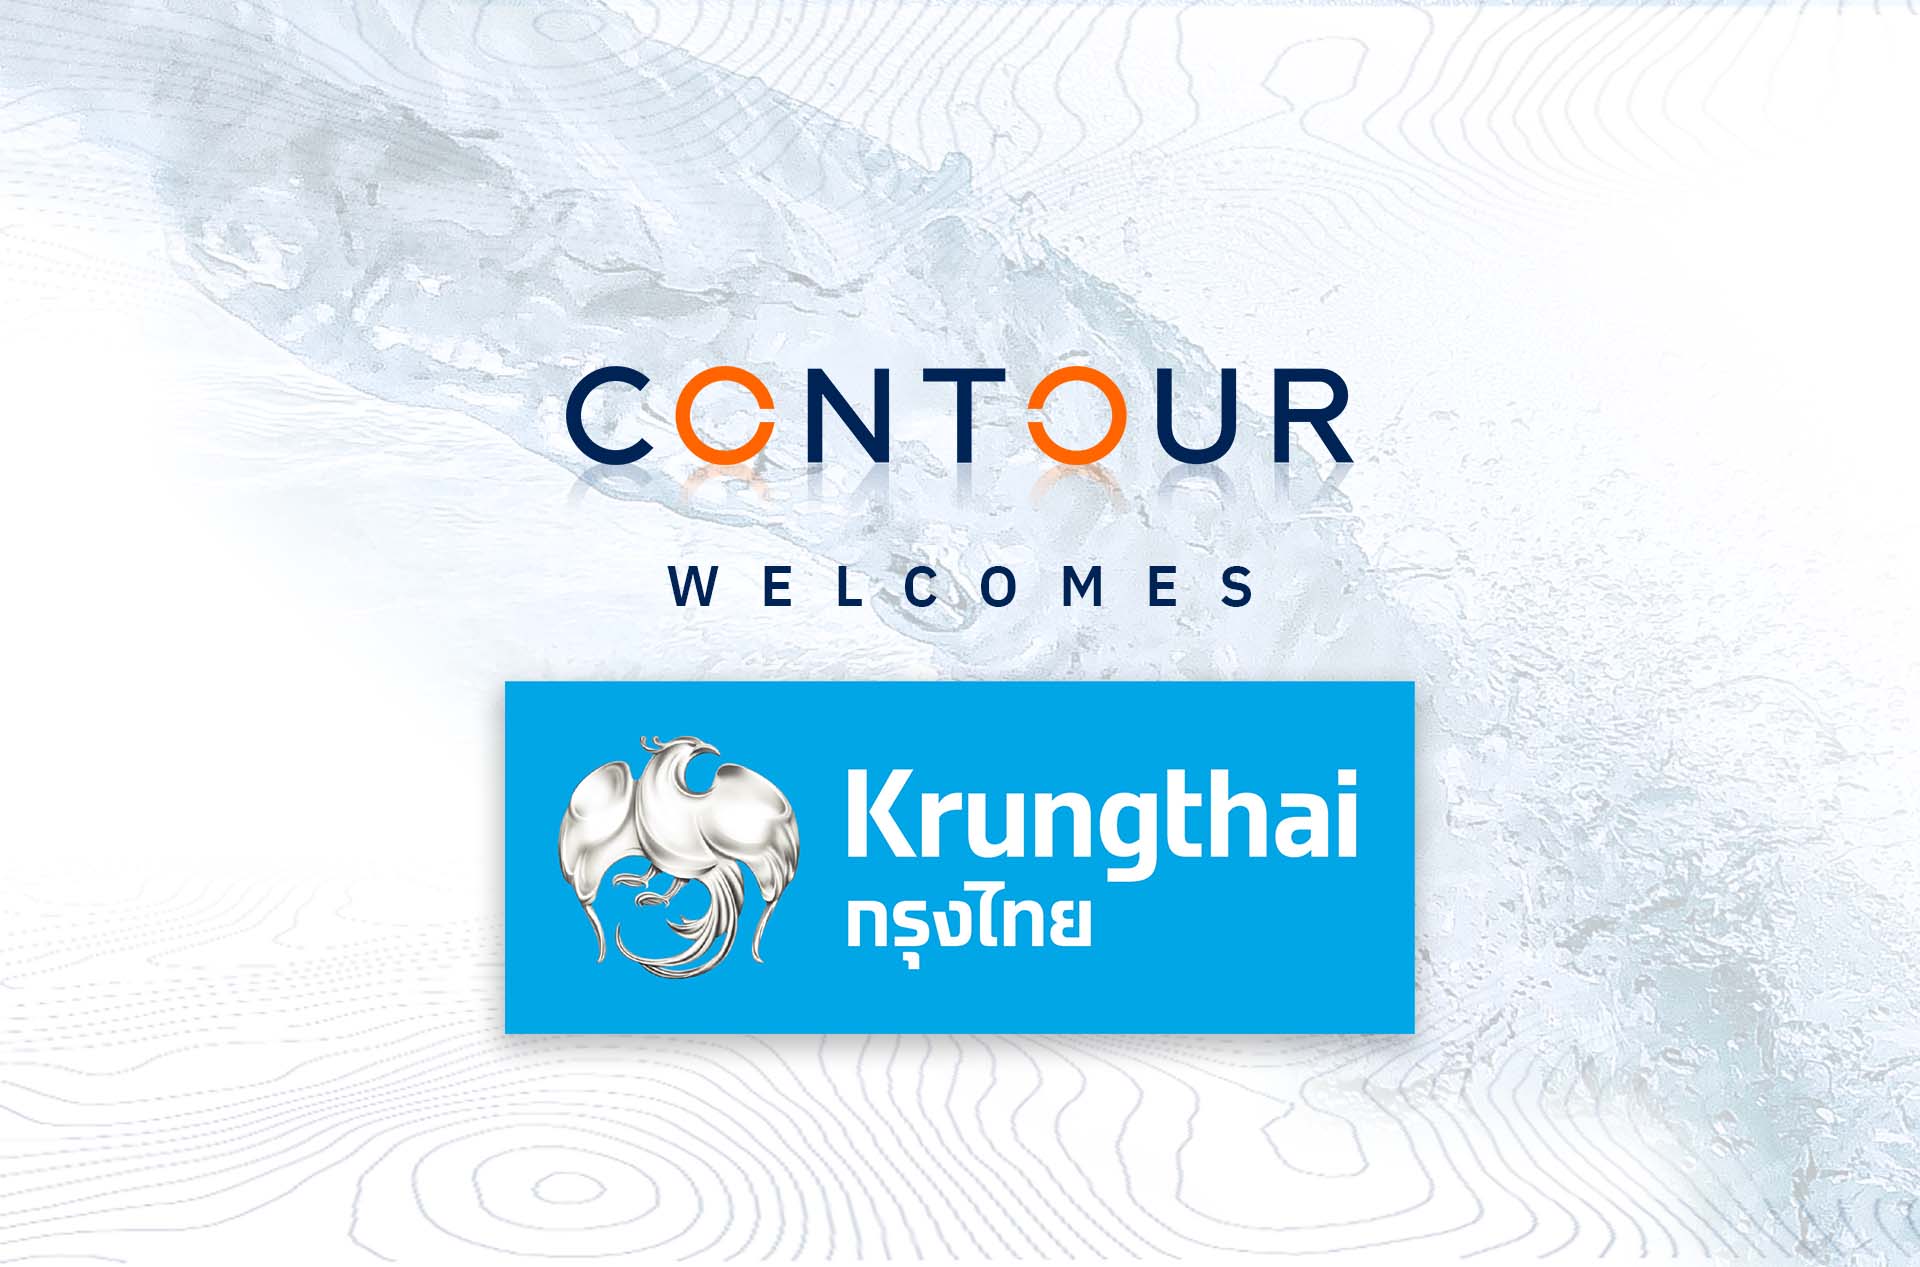 Krungthai Bank joins Contour’s growing network as it prioritises trade finance digitisation